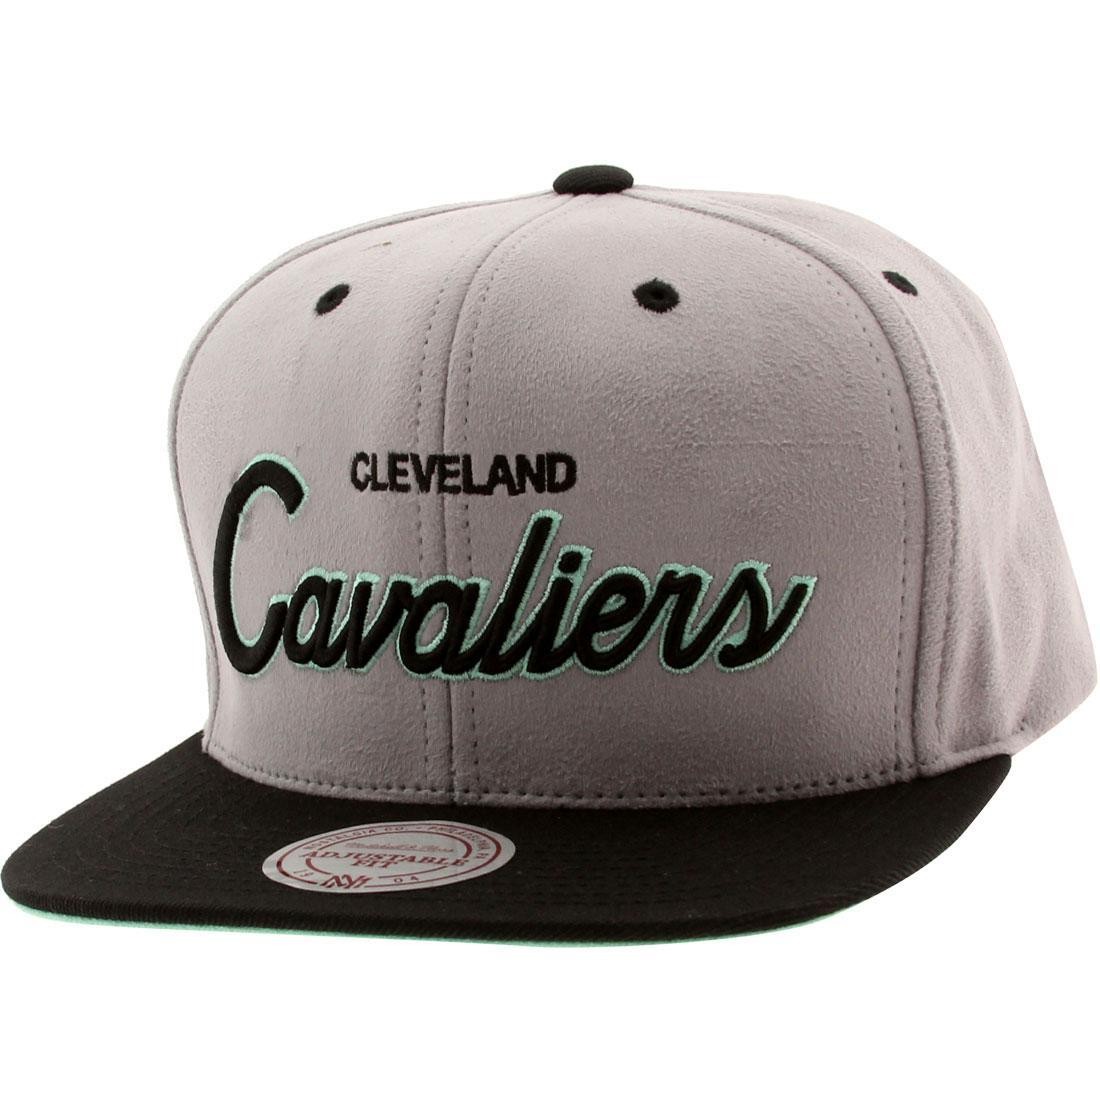 Mitchell And Ness Cleveland Cavaliers Lady Liberty Snapback Cap (gray / black / teal)